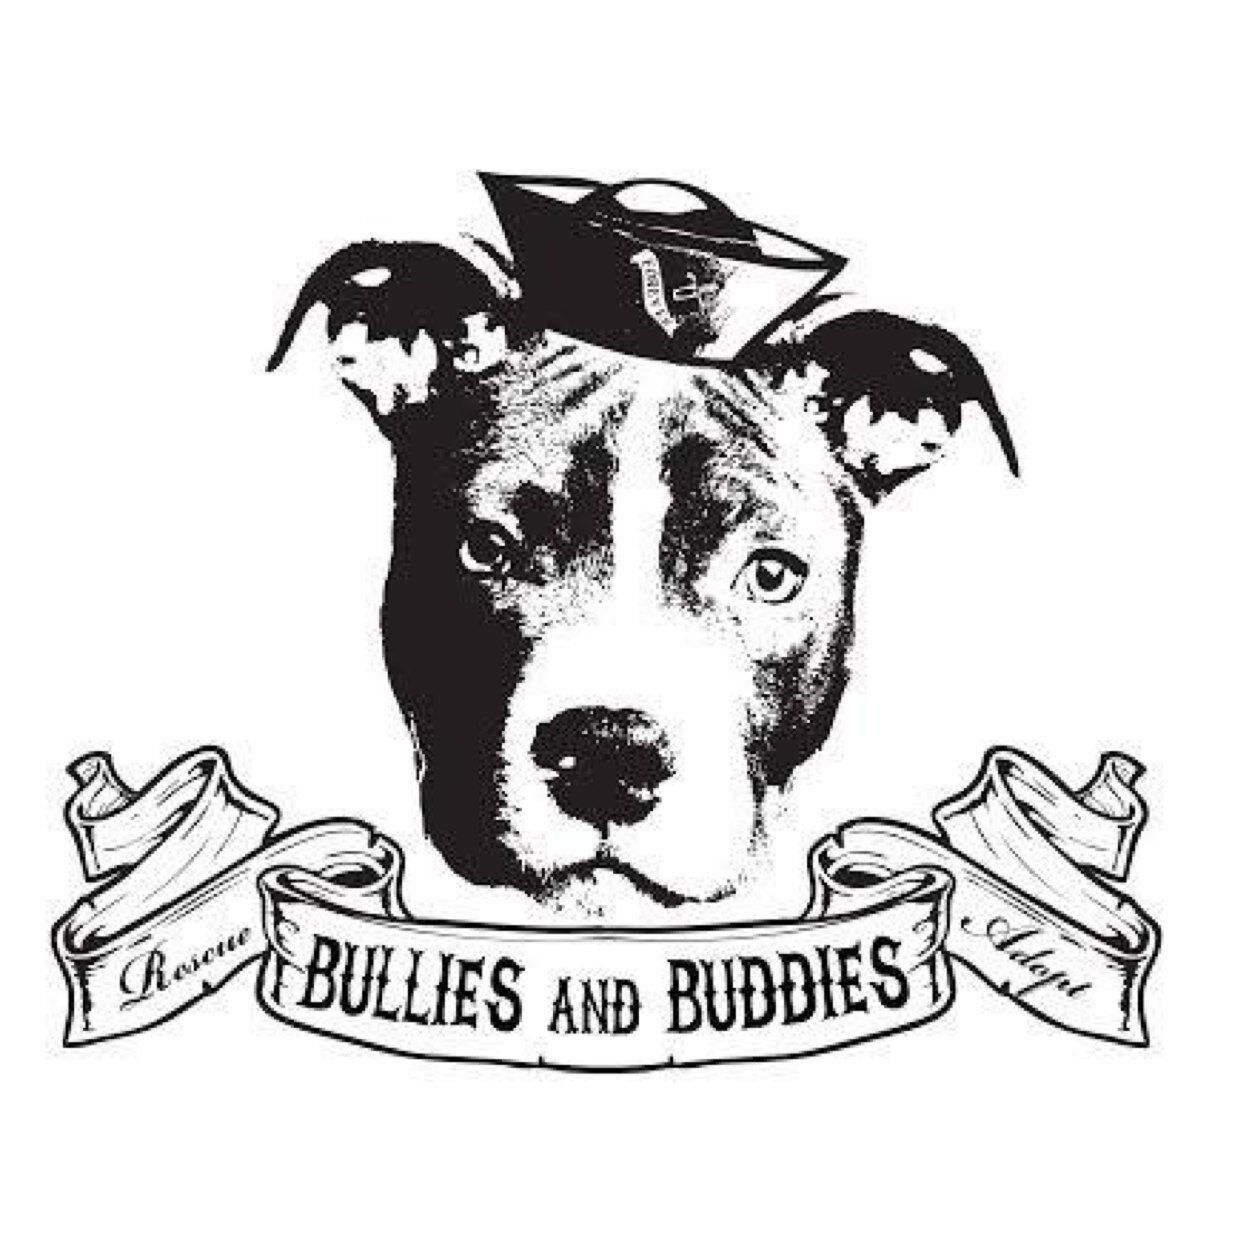 Hello! We are Bullies And Buddies and we are dedicated to rescuing, rehabilitating, and finding homes for all dogs in need in the LA area.